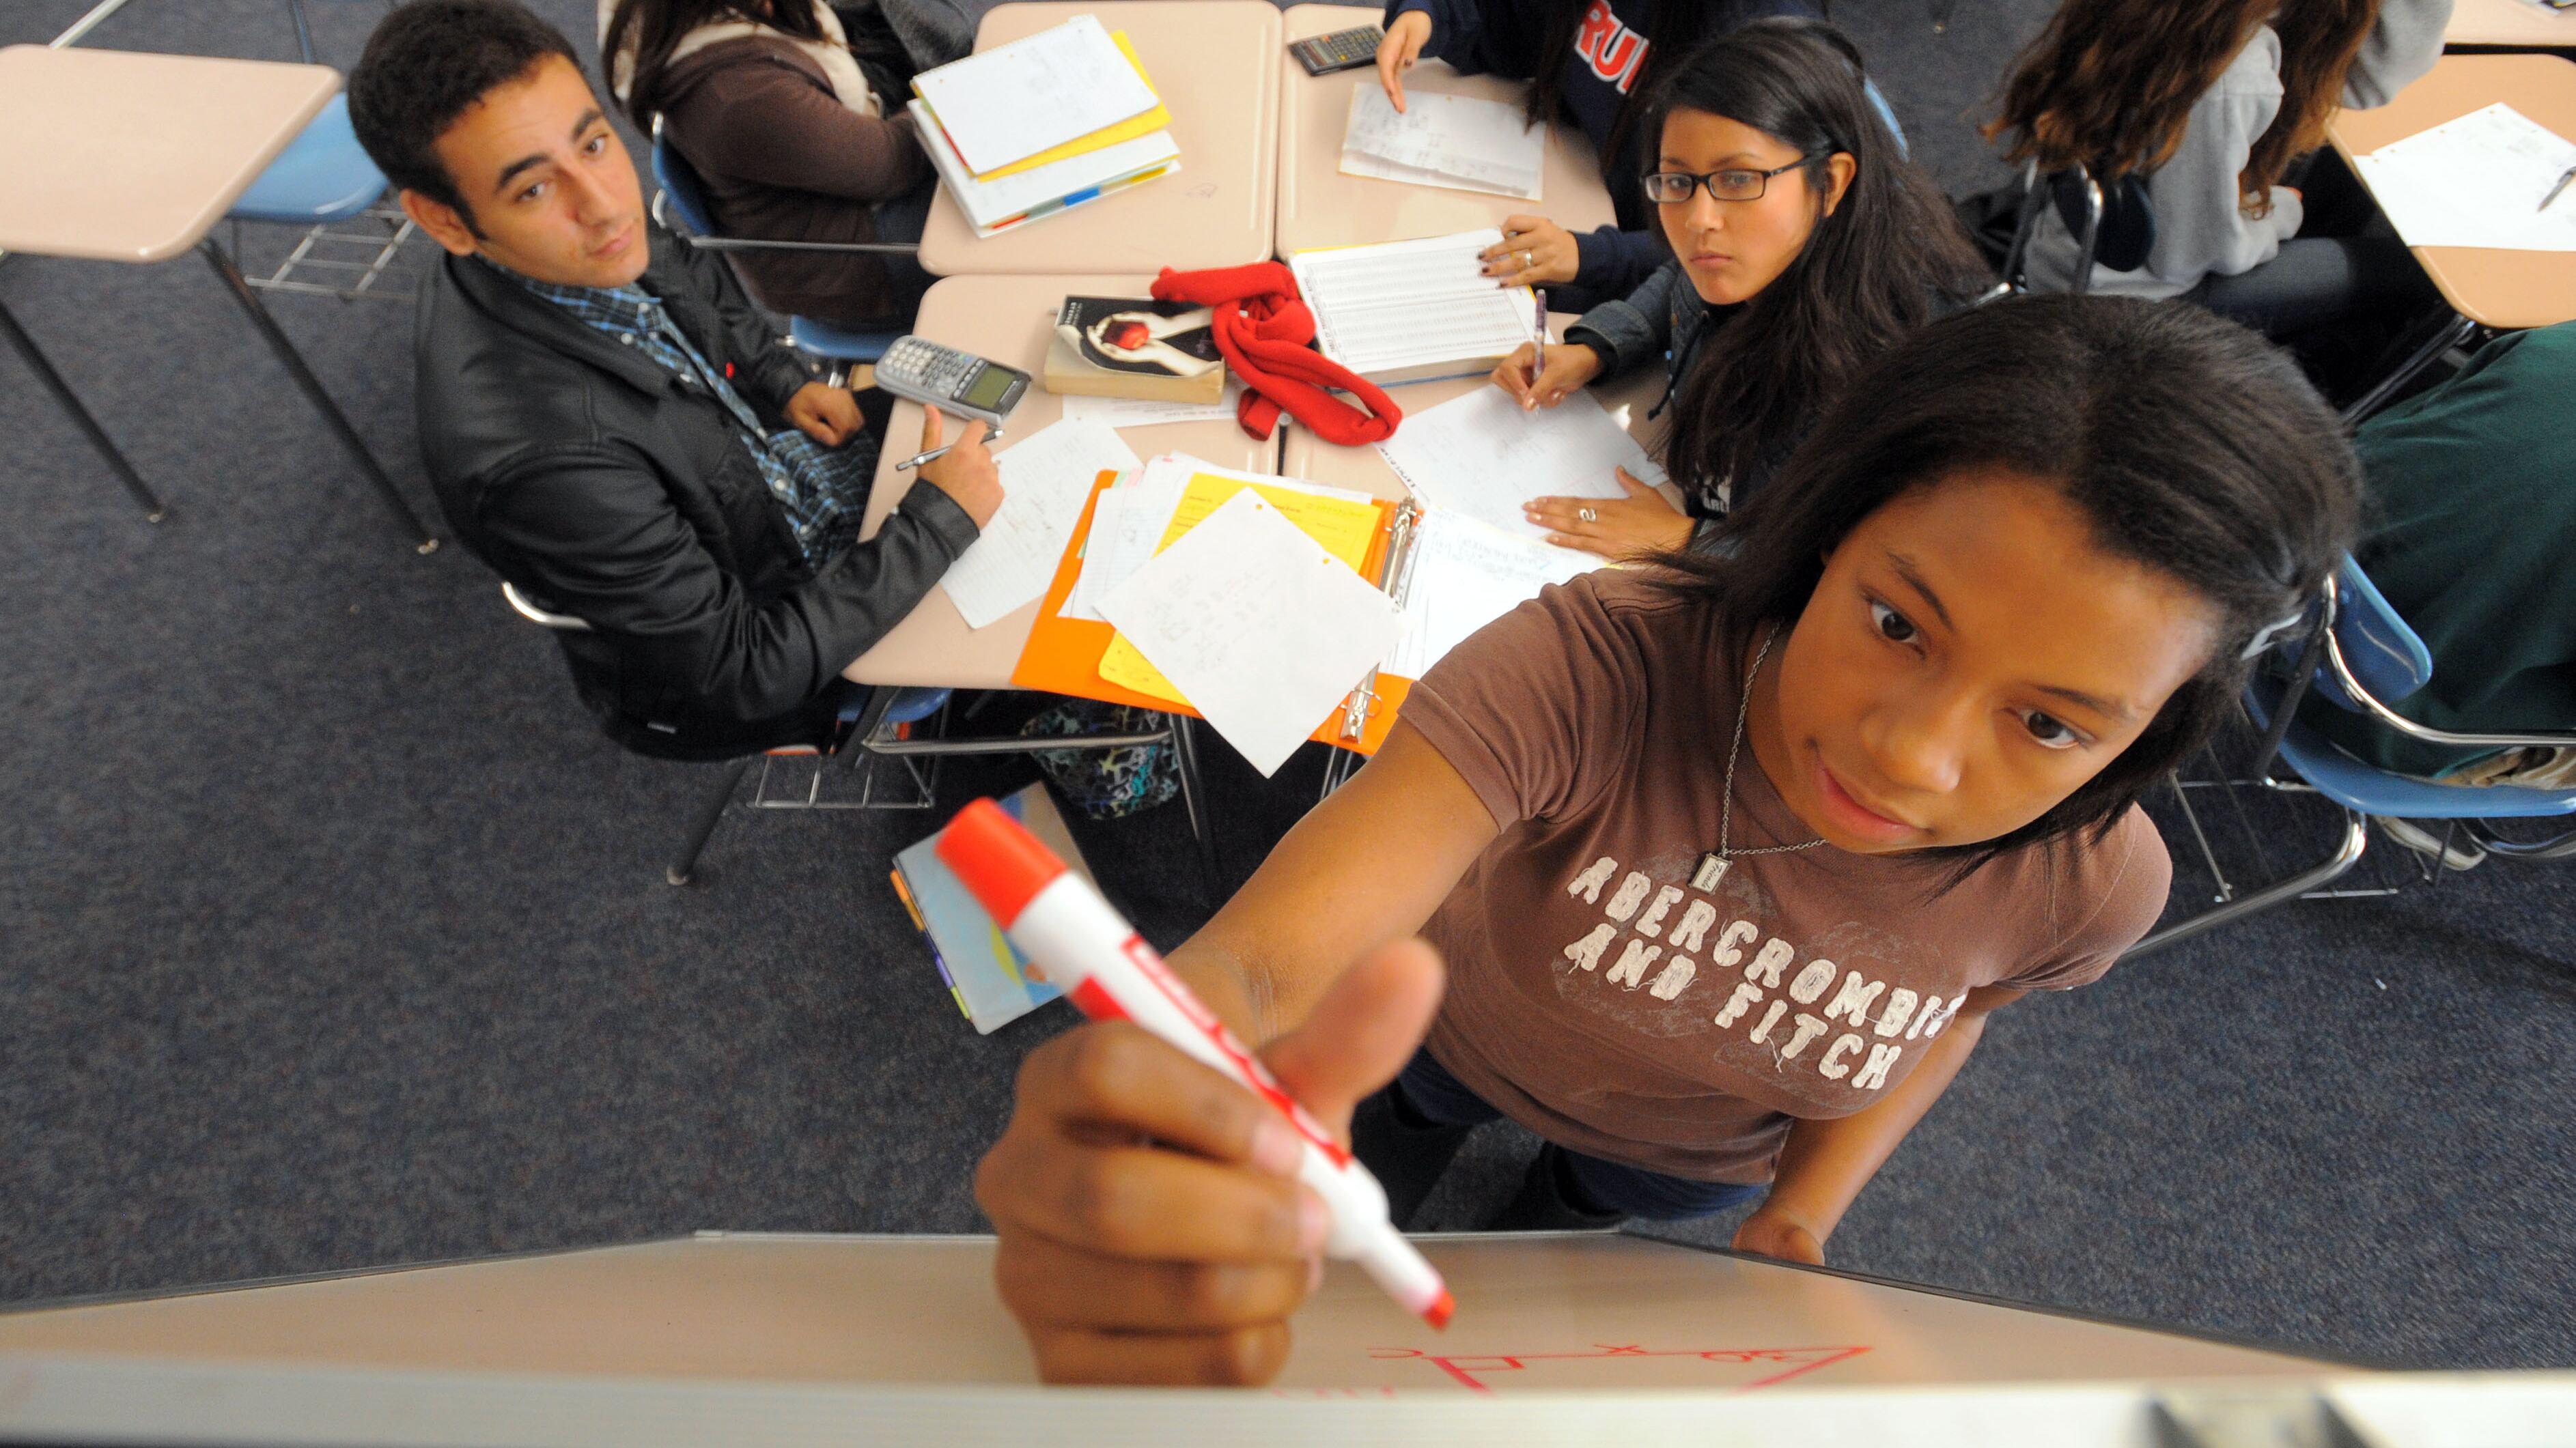 A teenage girl wearing a brown T-shirt holds a marker and writes a math problem on a whiteboard while her peers look on from a nearby desk.